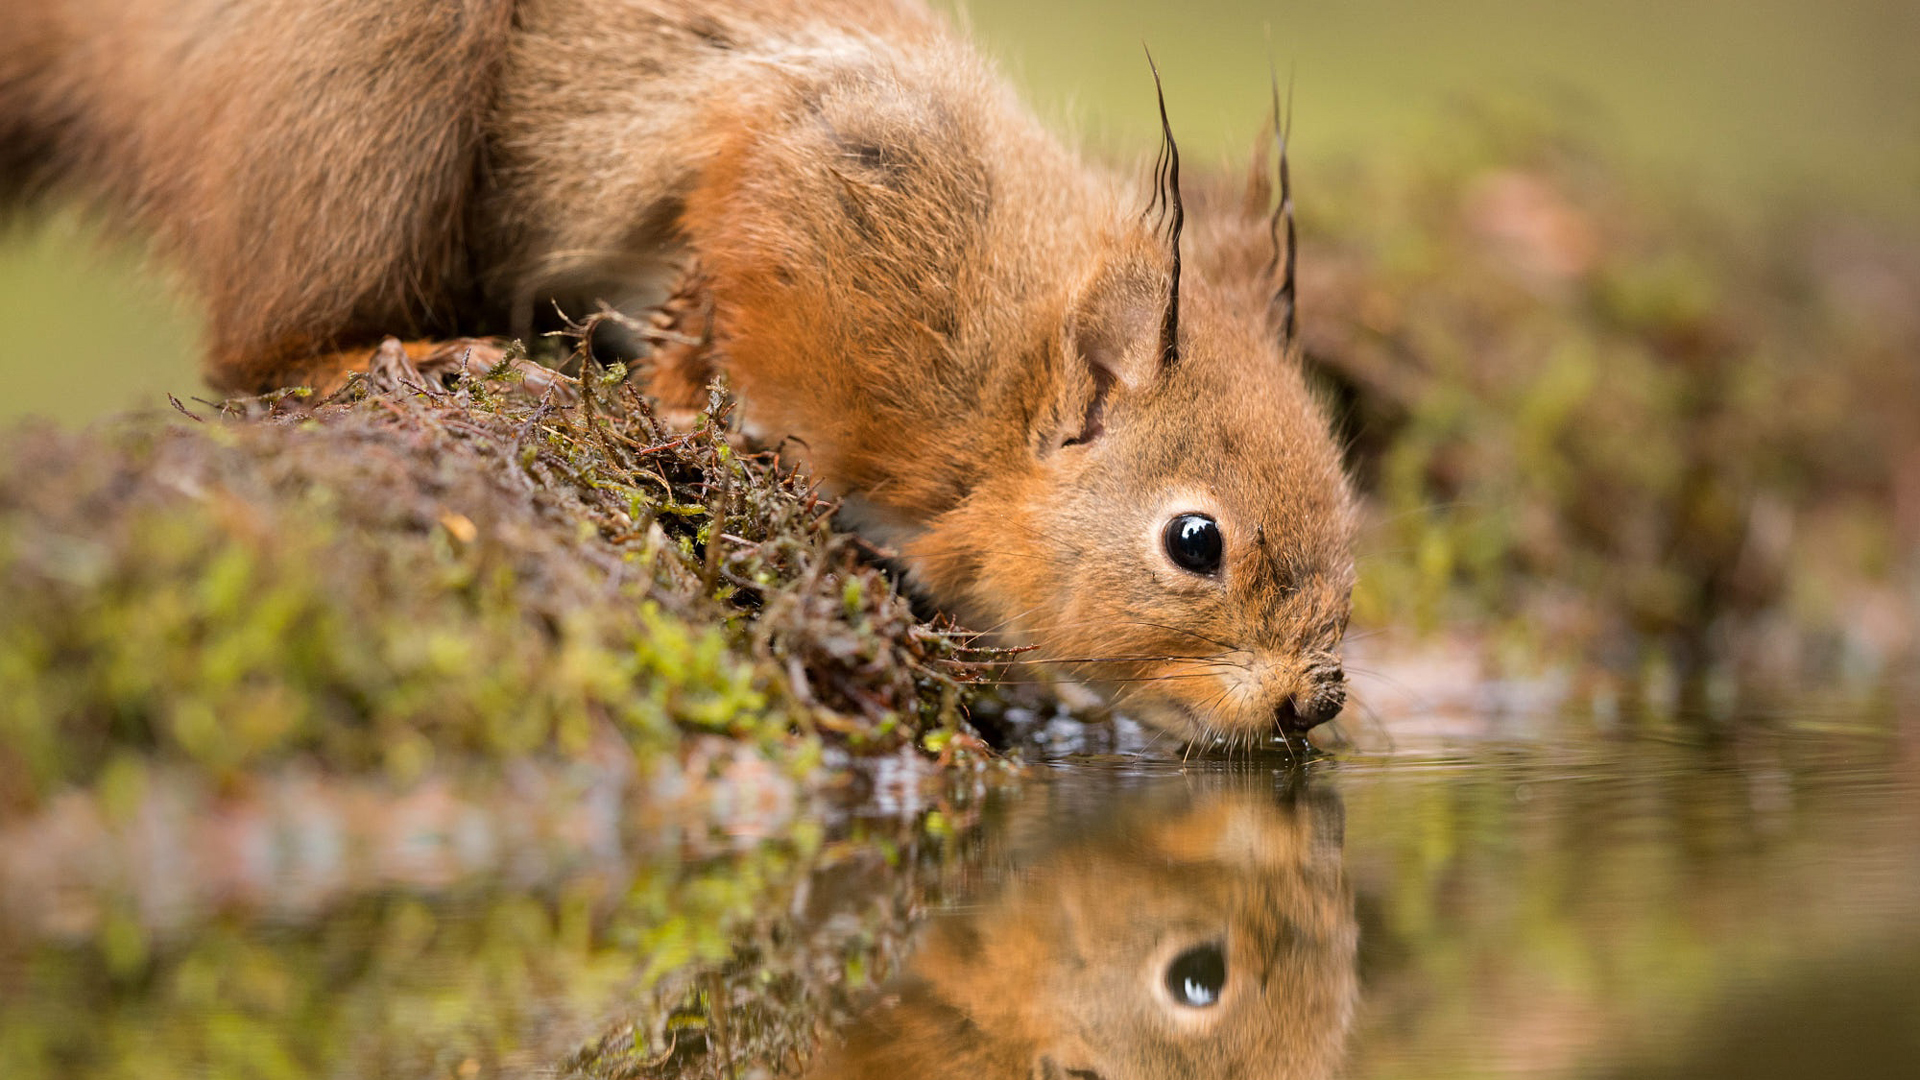 Squirrel Is Drinking Water Reflection On River HD Squirrel